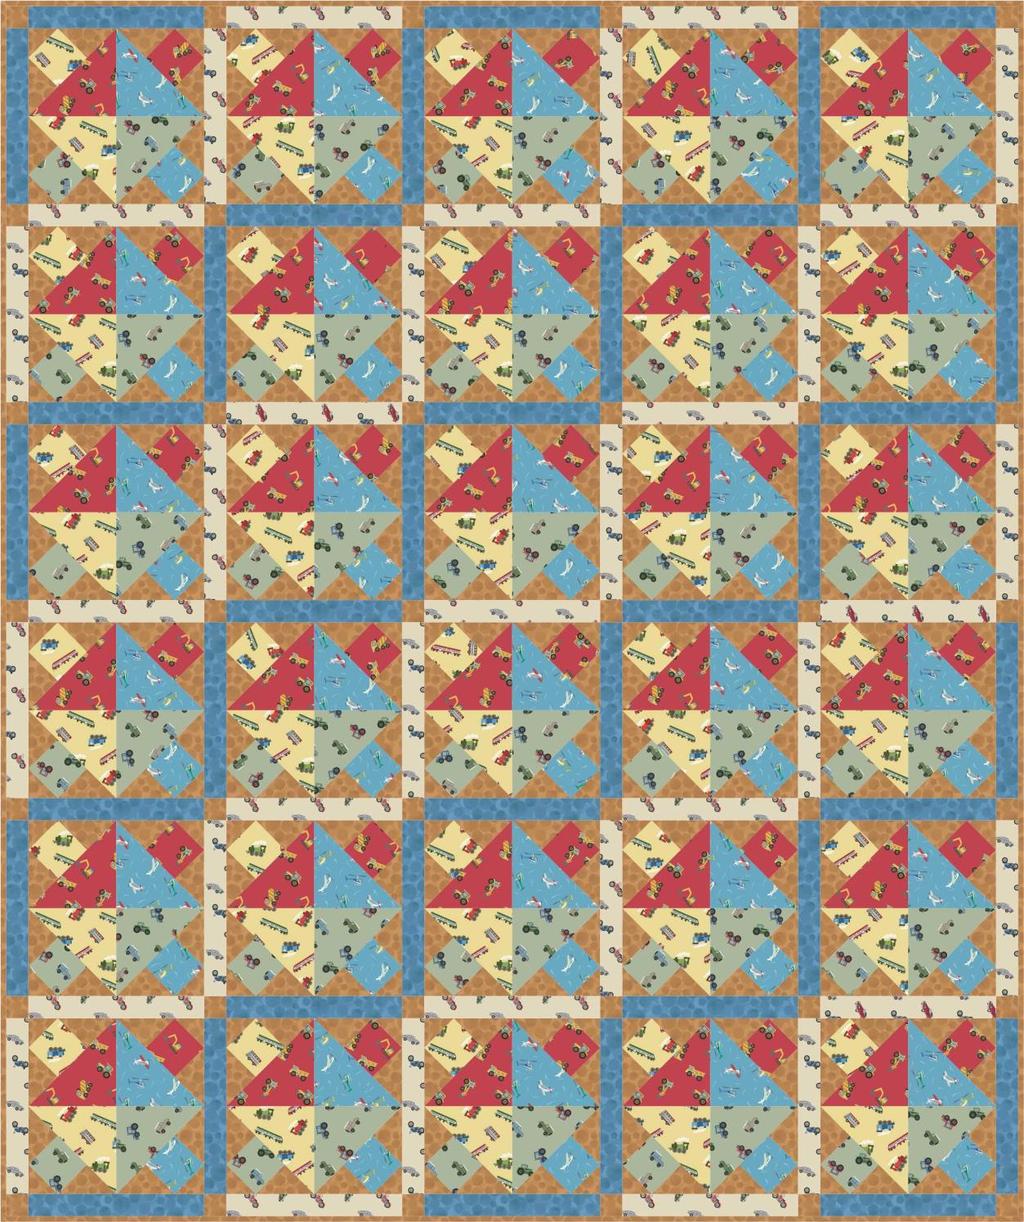 Small Things on the Move Quilt (Design 3) Designed and made by Sally Ablett Size: 46 x 55 Block: 8½ x 8½ QUILT 3 FABRIC REQUIREMENTS (Small Things on the Move Collection) Fabric 1: ½yd - ½mtr - SM11.